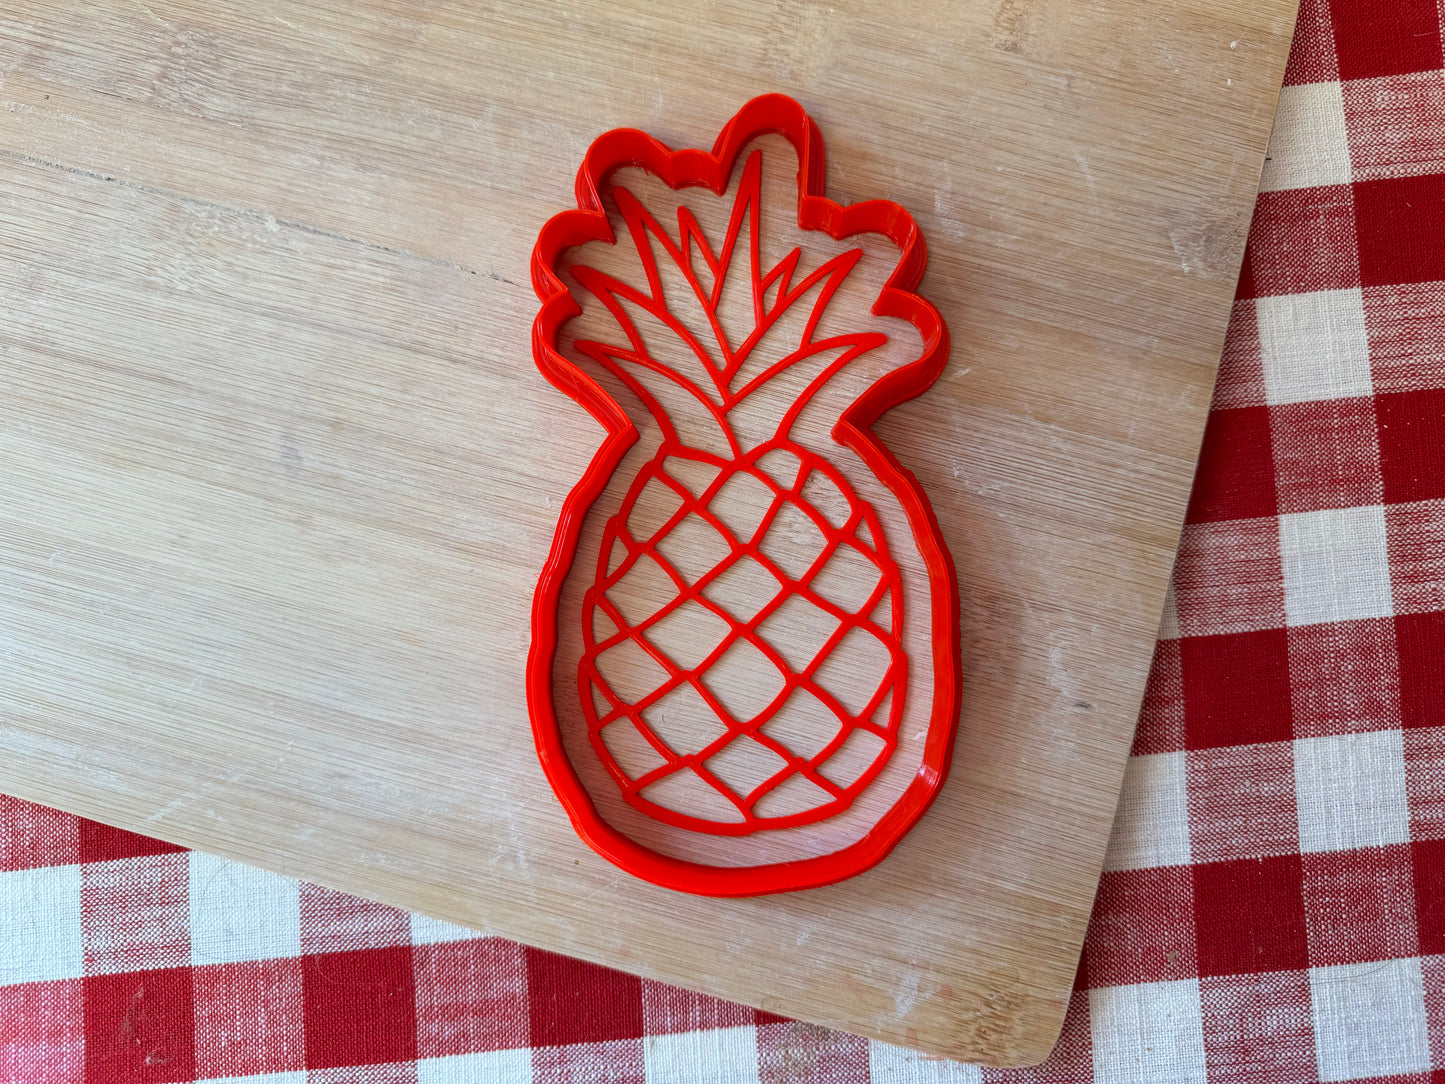 Pineapple Design Pottery Stamp or Stencil w/optional cutter - plastic 3d printed, multiple sizes available